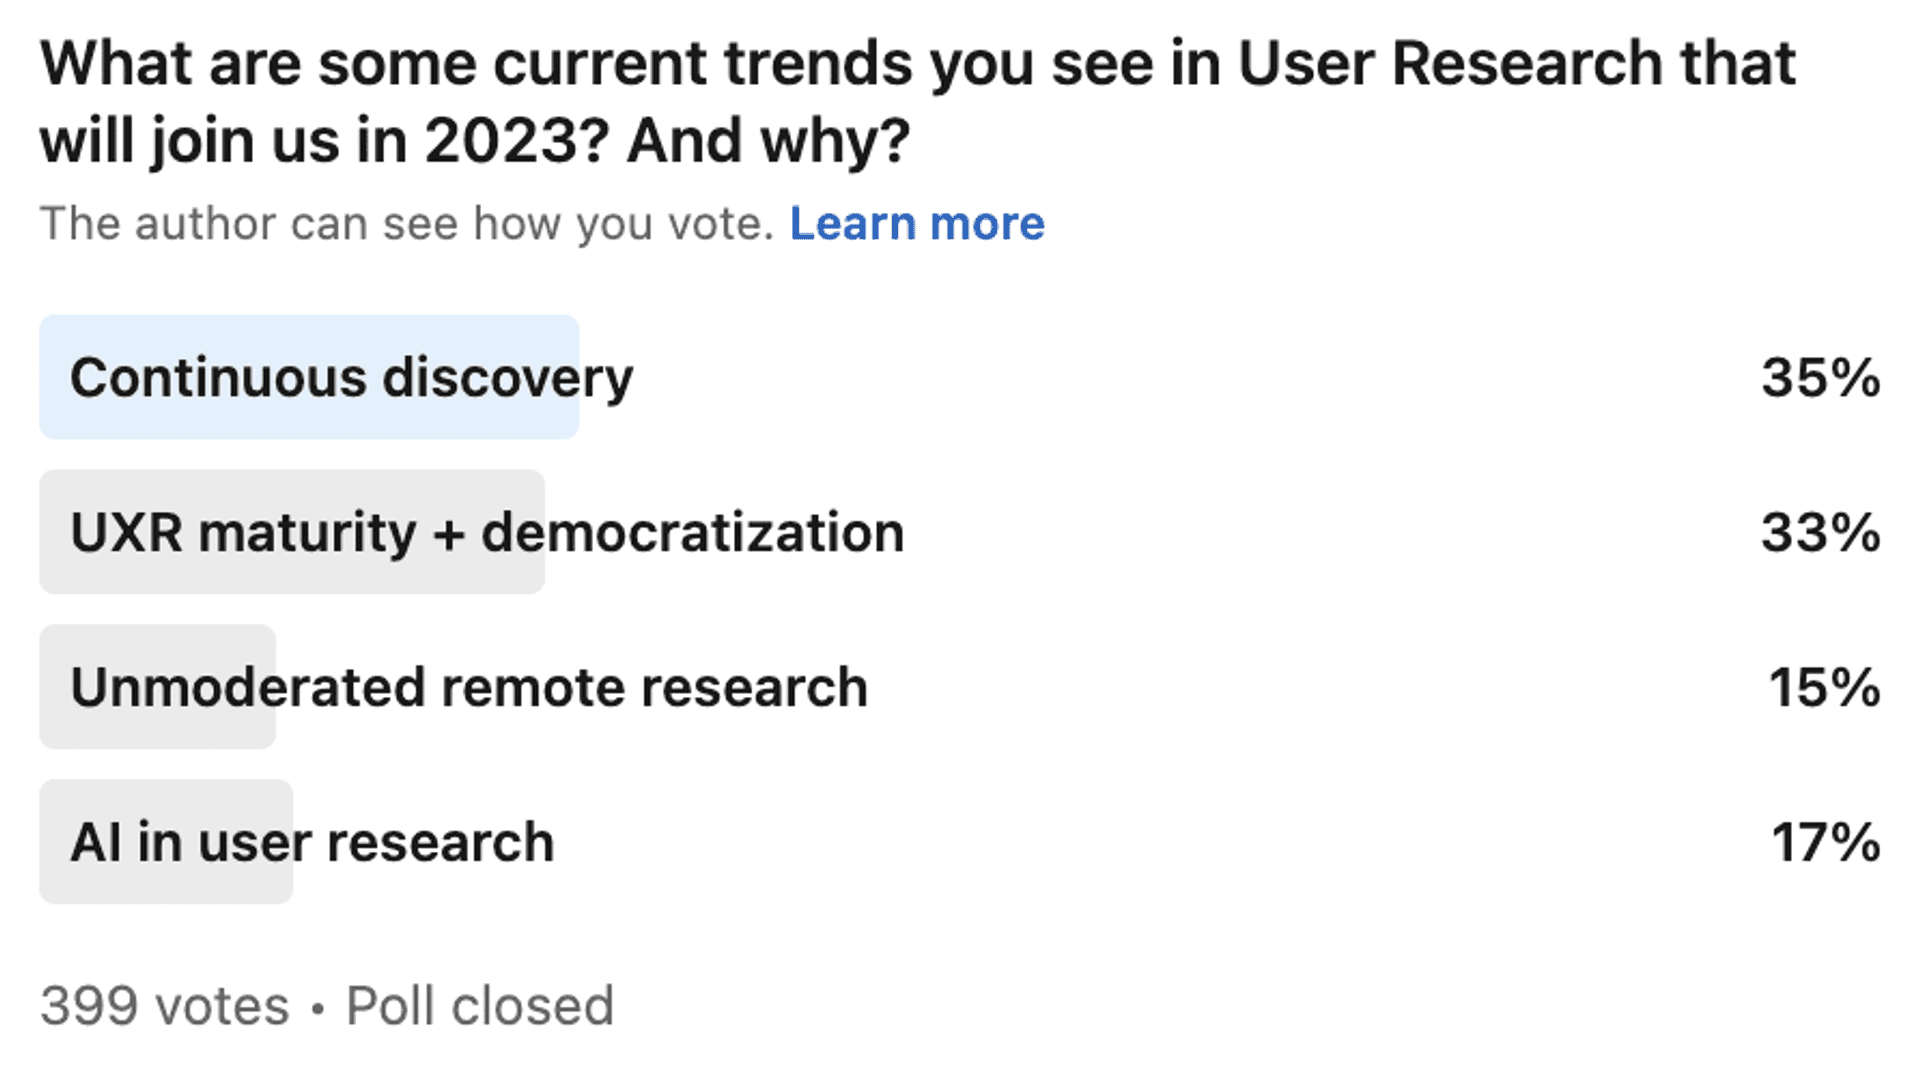 Poll showing top 2023 UX research trends